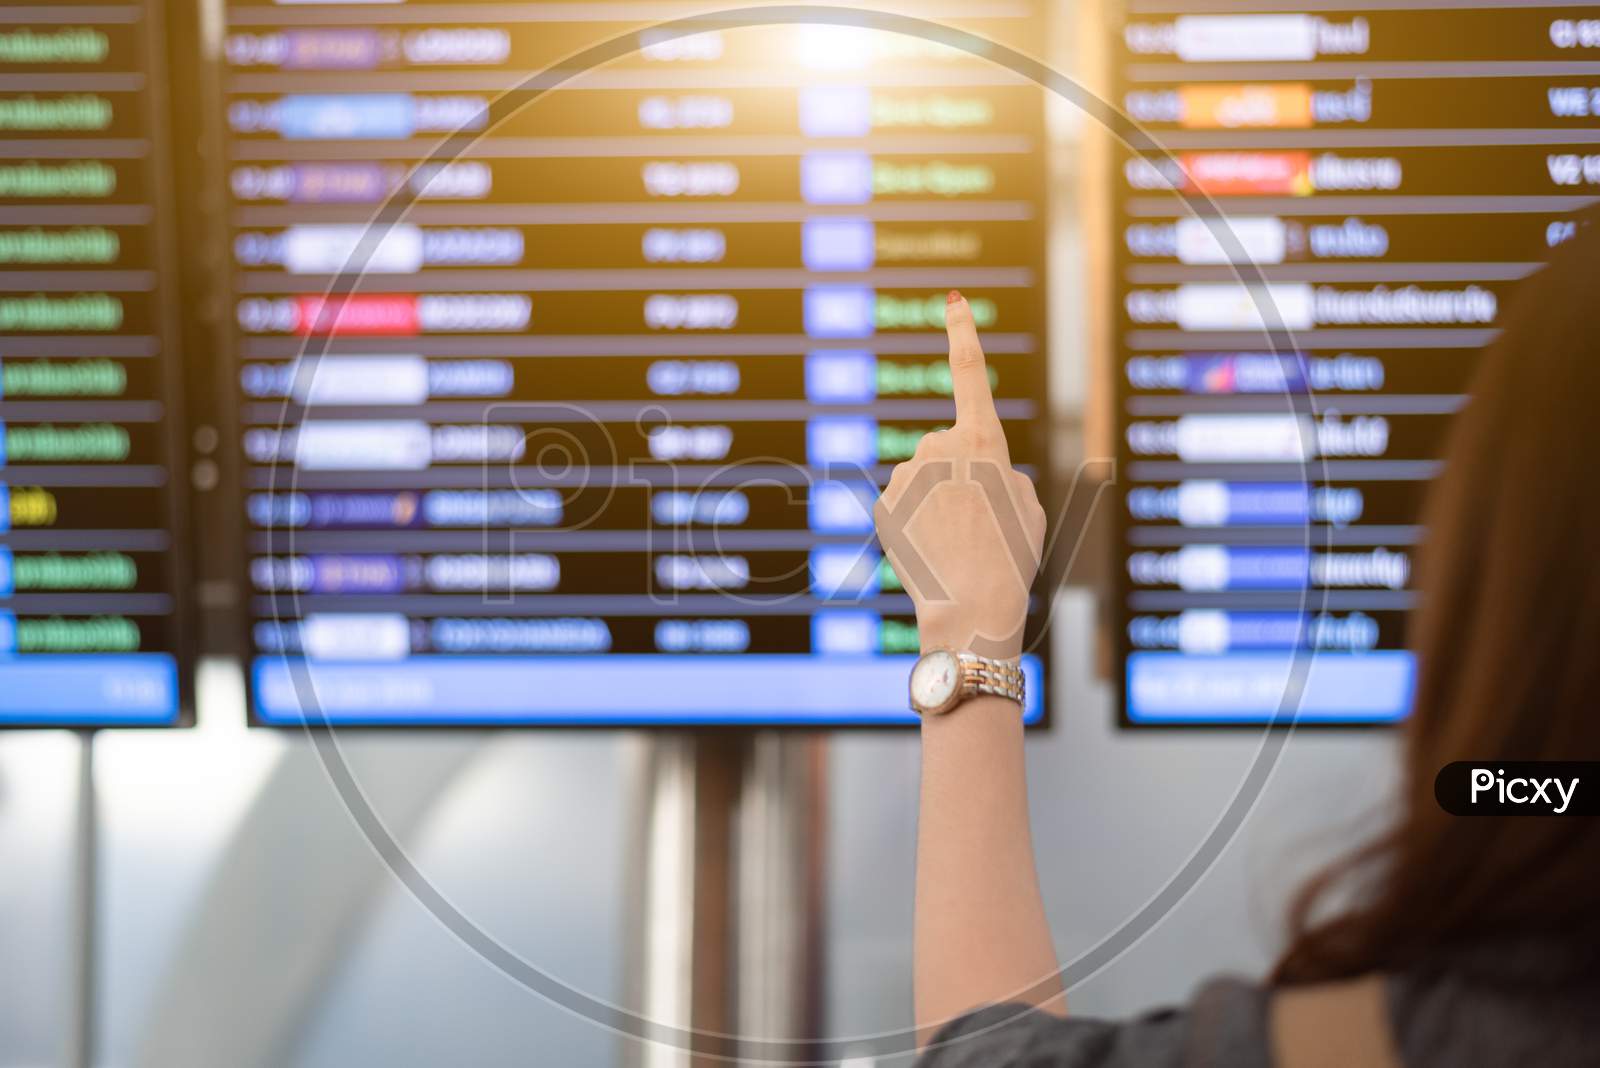 Back View Of Woman Looking For Flights From Flight Schedule In Airport. Female Tourist Pointing At Time Table For Take Off Plane. Travel And Transportation Concept. Vacation And Long Holiday Theme.